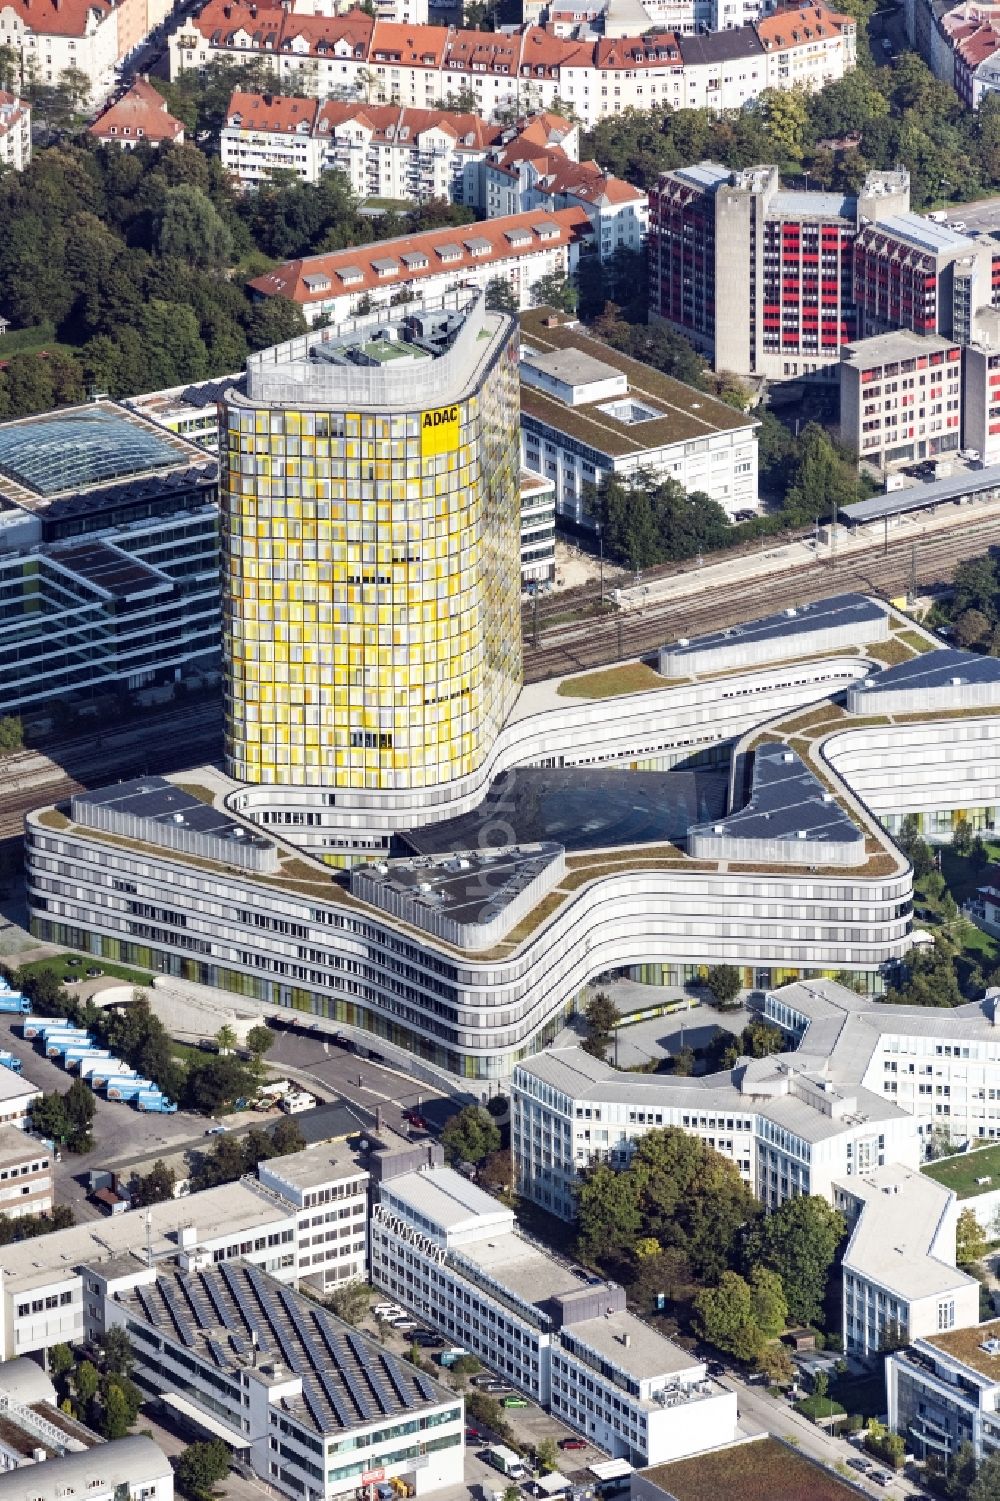 München from above - High-rise ensemble of ADAC Zentrale in the district Sendling-Westpark in Munich in the state Bavaria, Germany